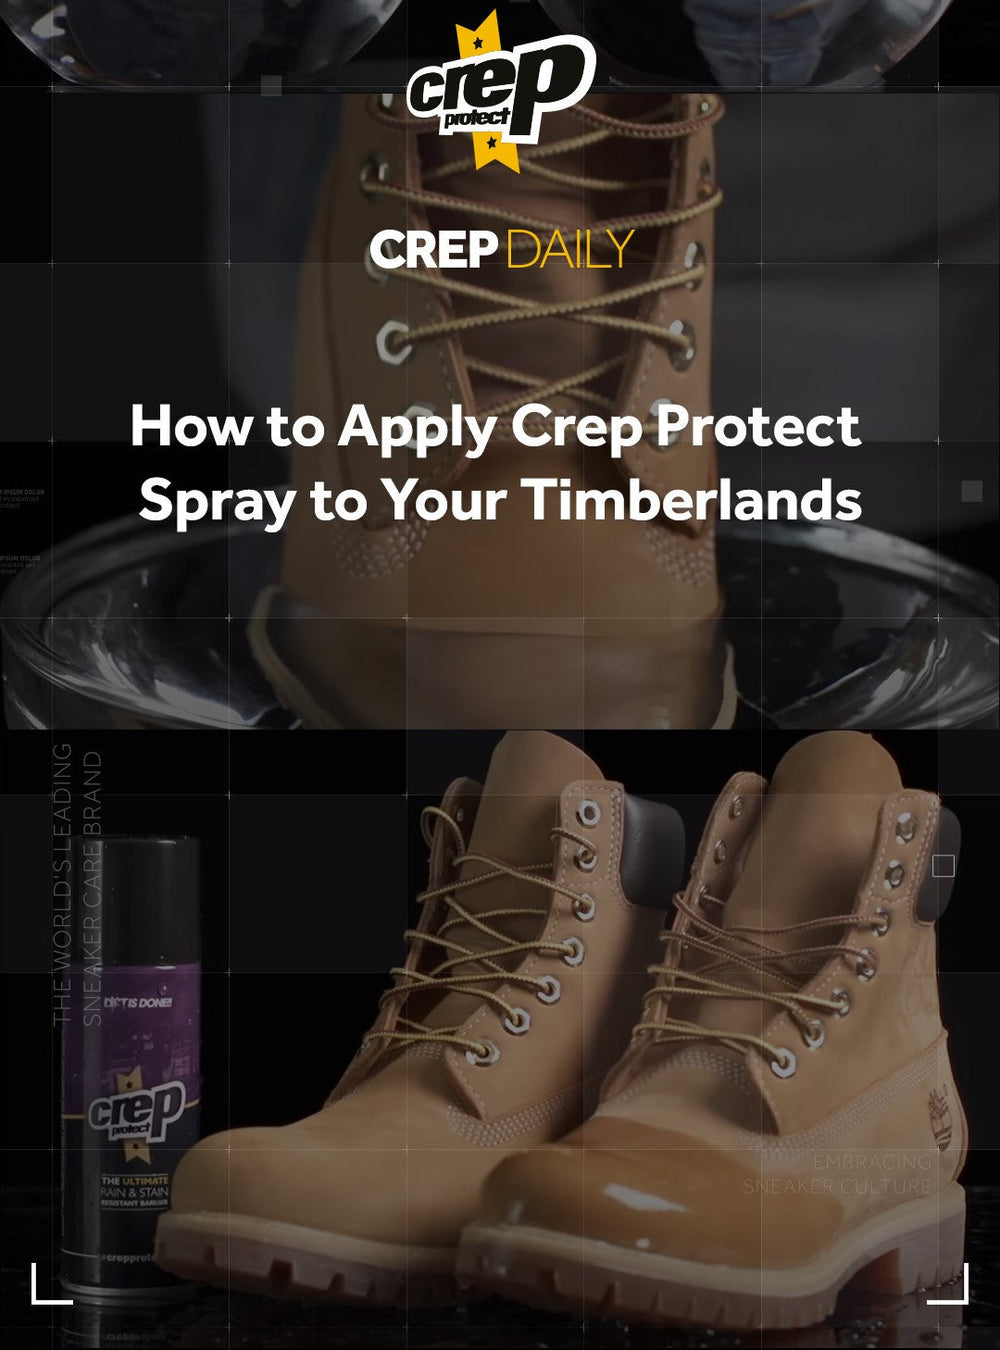 How to Apply Crep Protect Spray to your Timberlands – CrepProtect